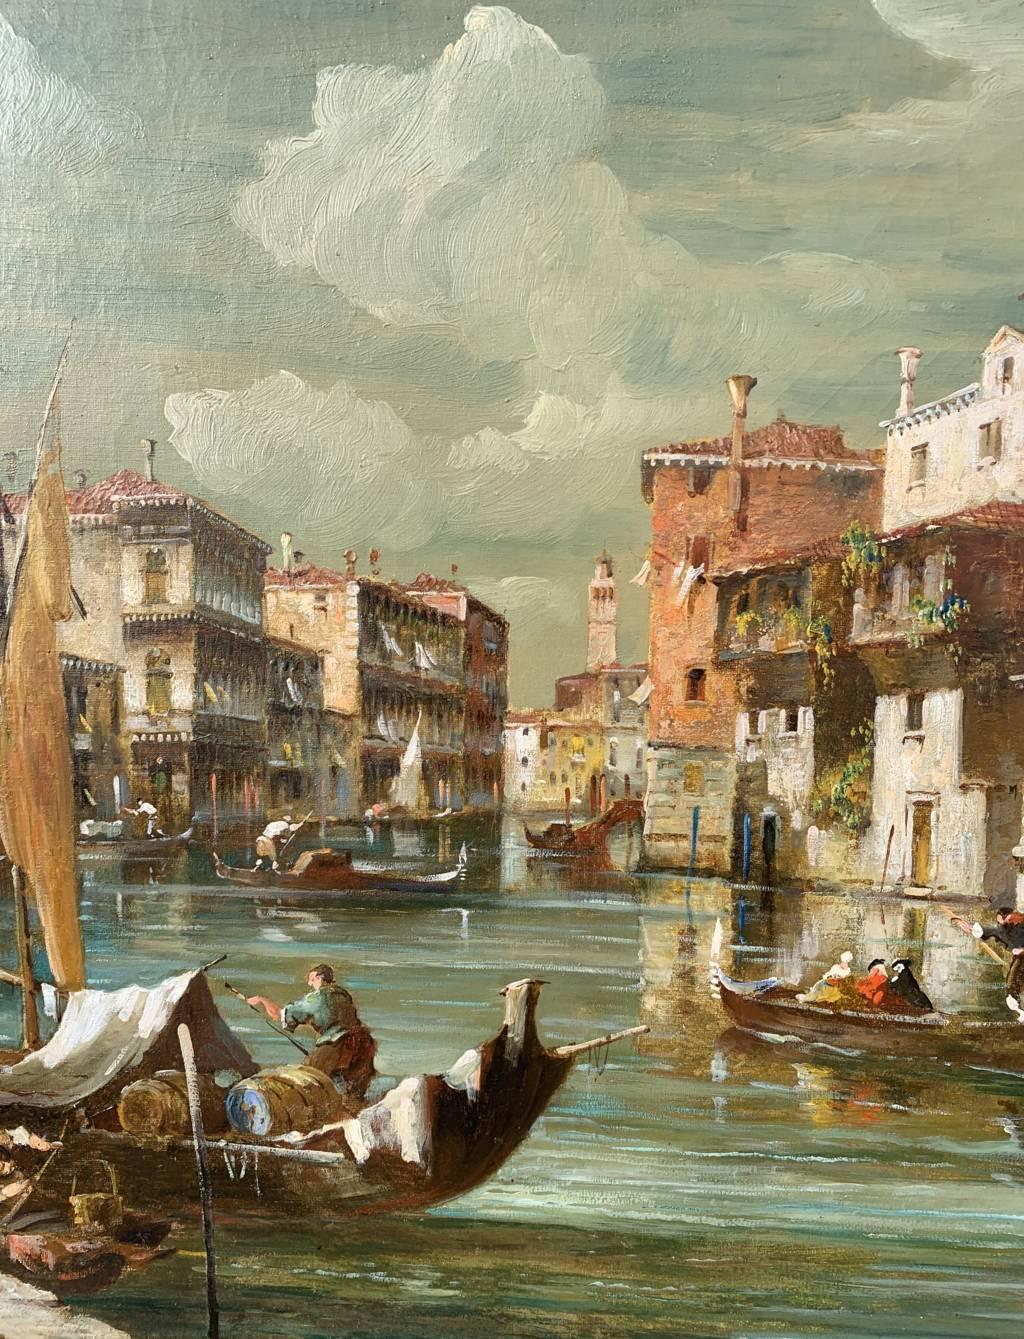 Eugenio Bonivento, called ZENO (Chioggia 1880 - Milan 1956) - Venice, view of the Grand Canal.

71 x 100 cm without frame, 97 x 126 cm with frame.

Antique oil painting on canvas, in original frame.

- Work signed bottom right: “E. ZENO”.

Condition